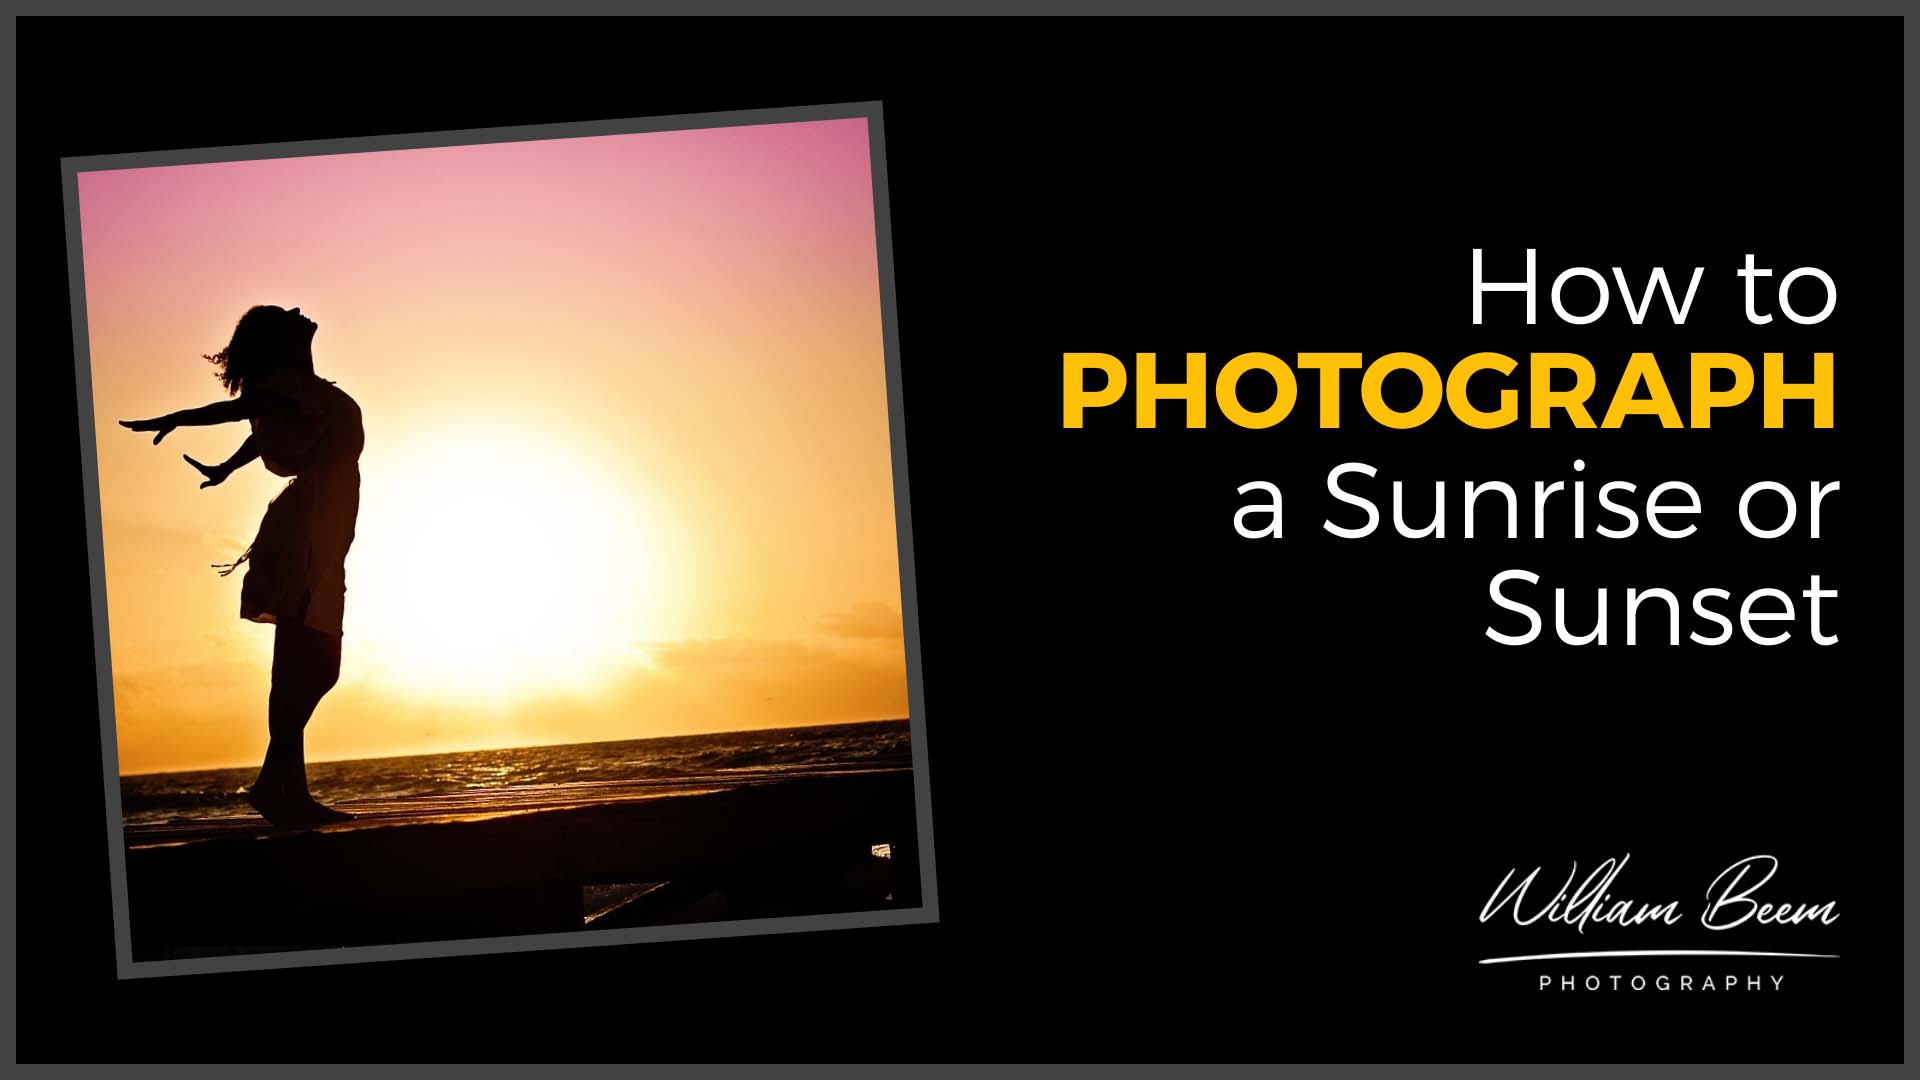 Warm Hd Sunset Photography 2021 Wallpapers